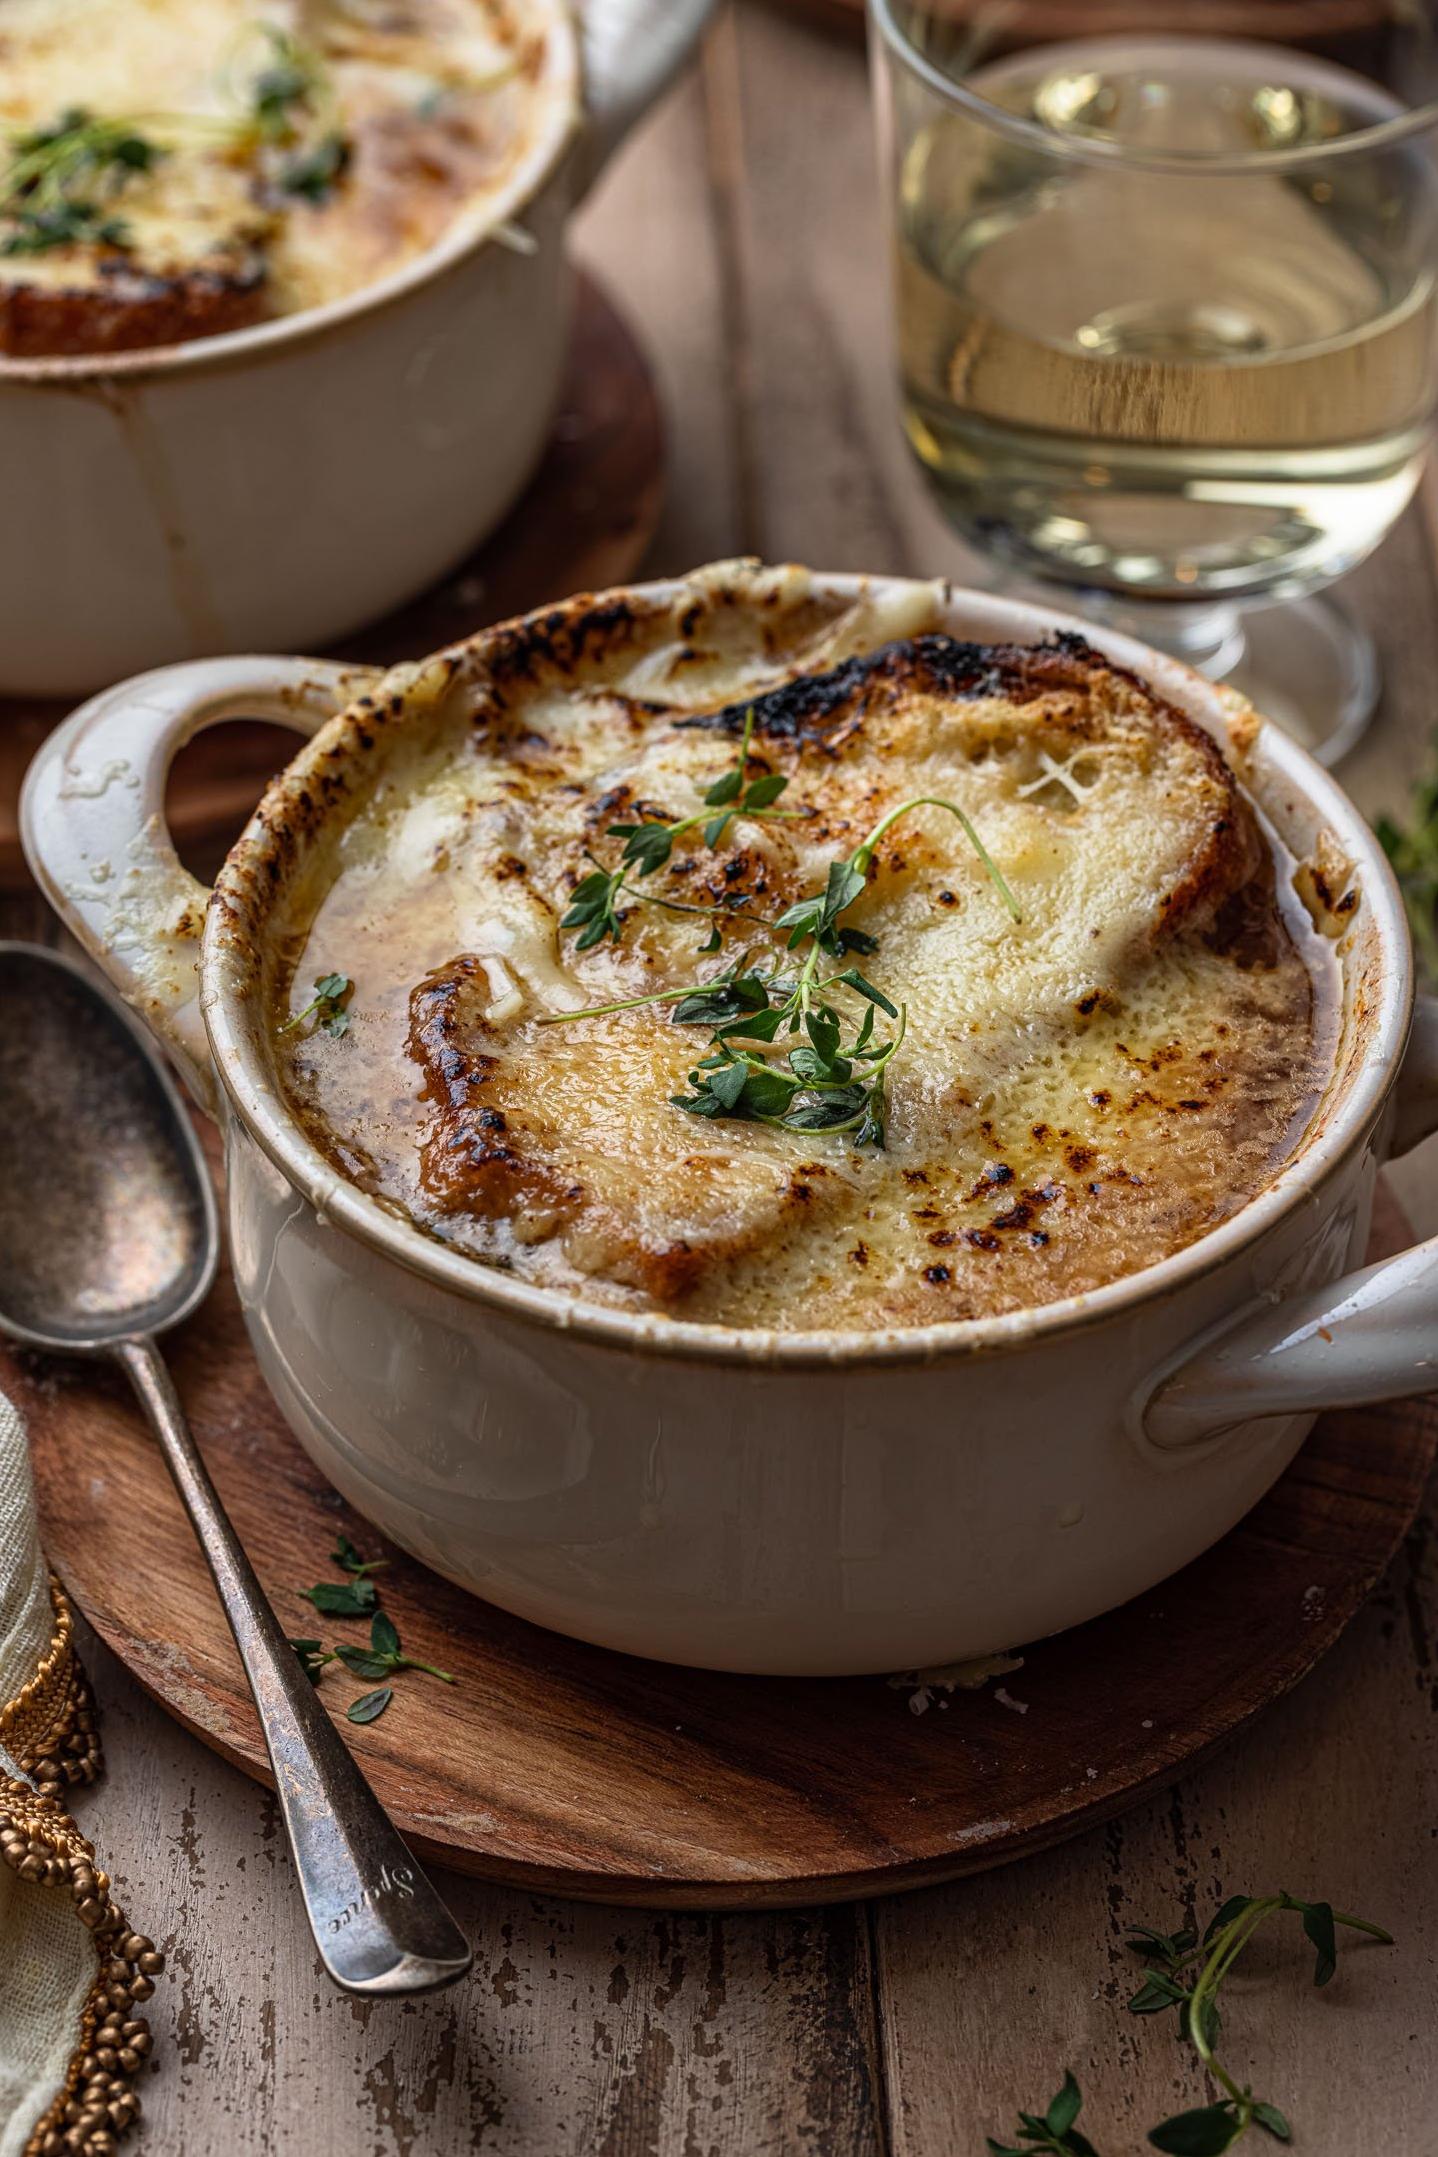  The perfect comfort food for a chilly evening.